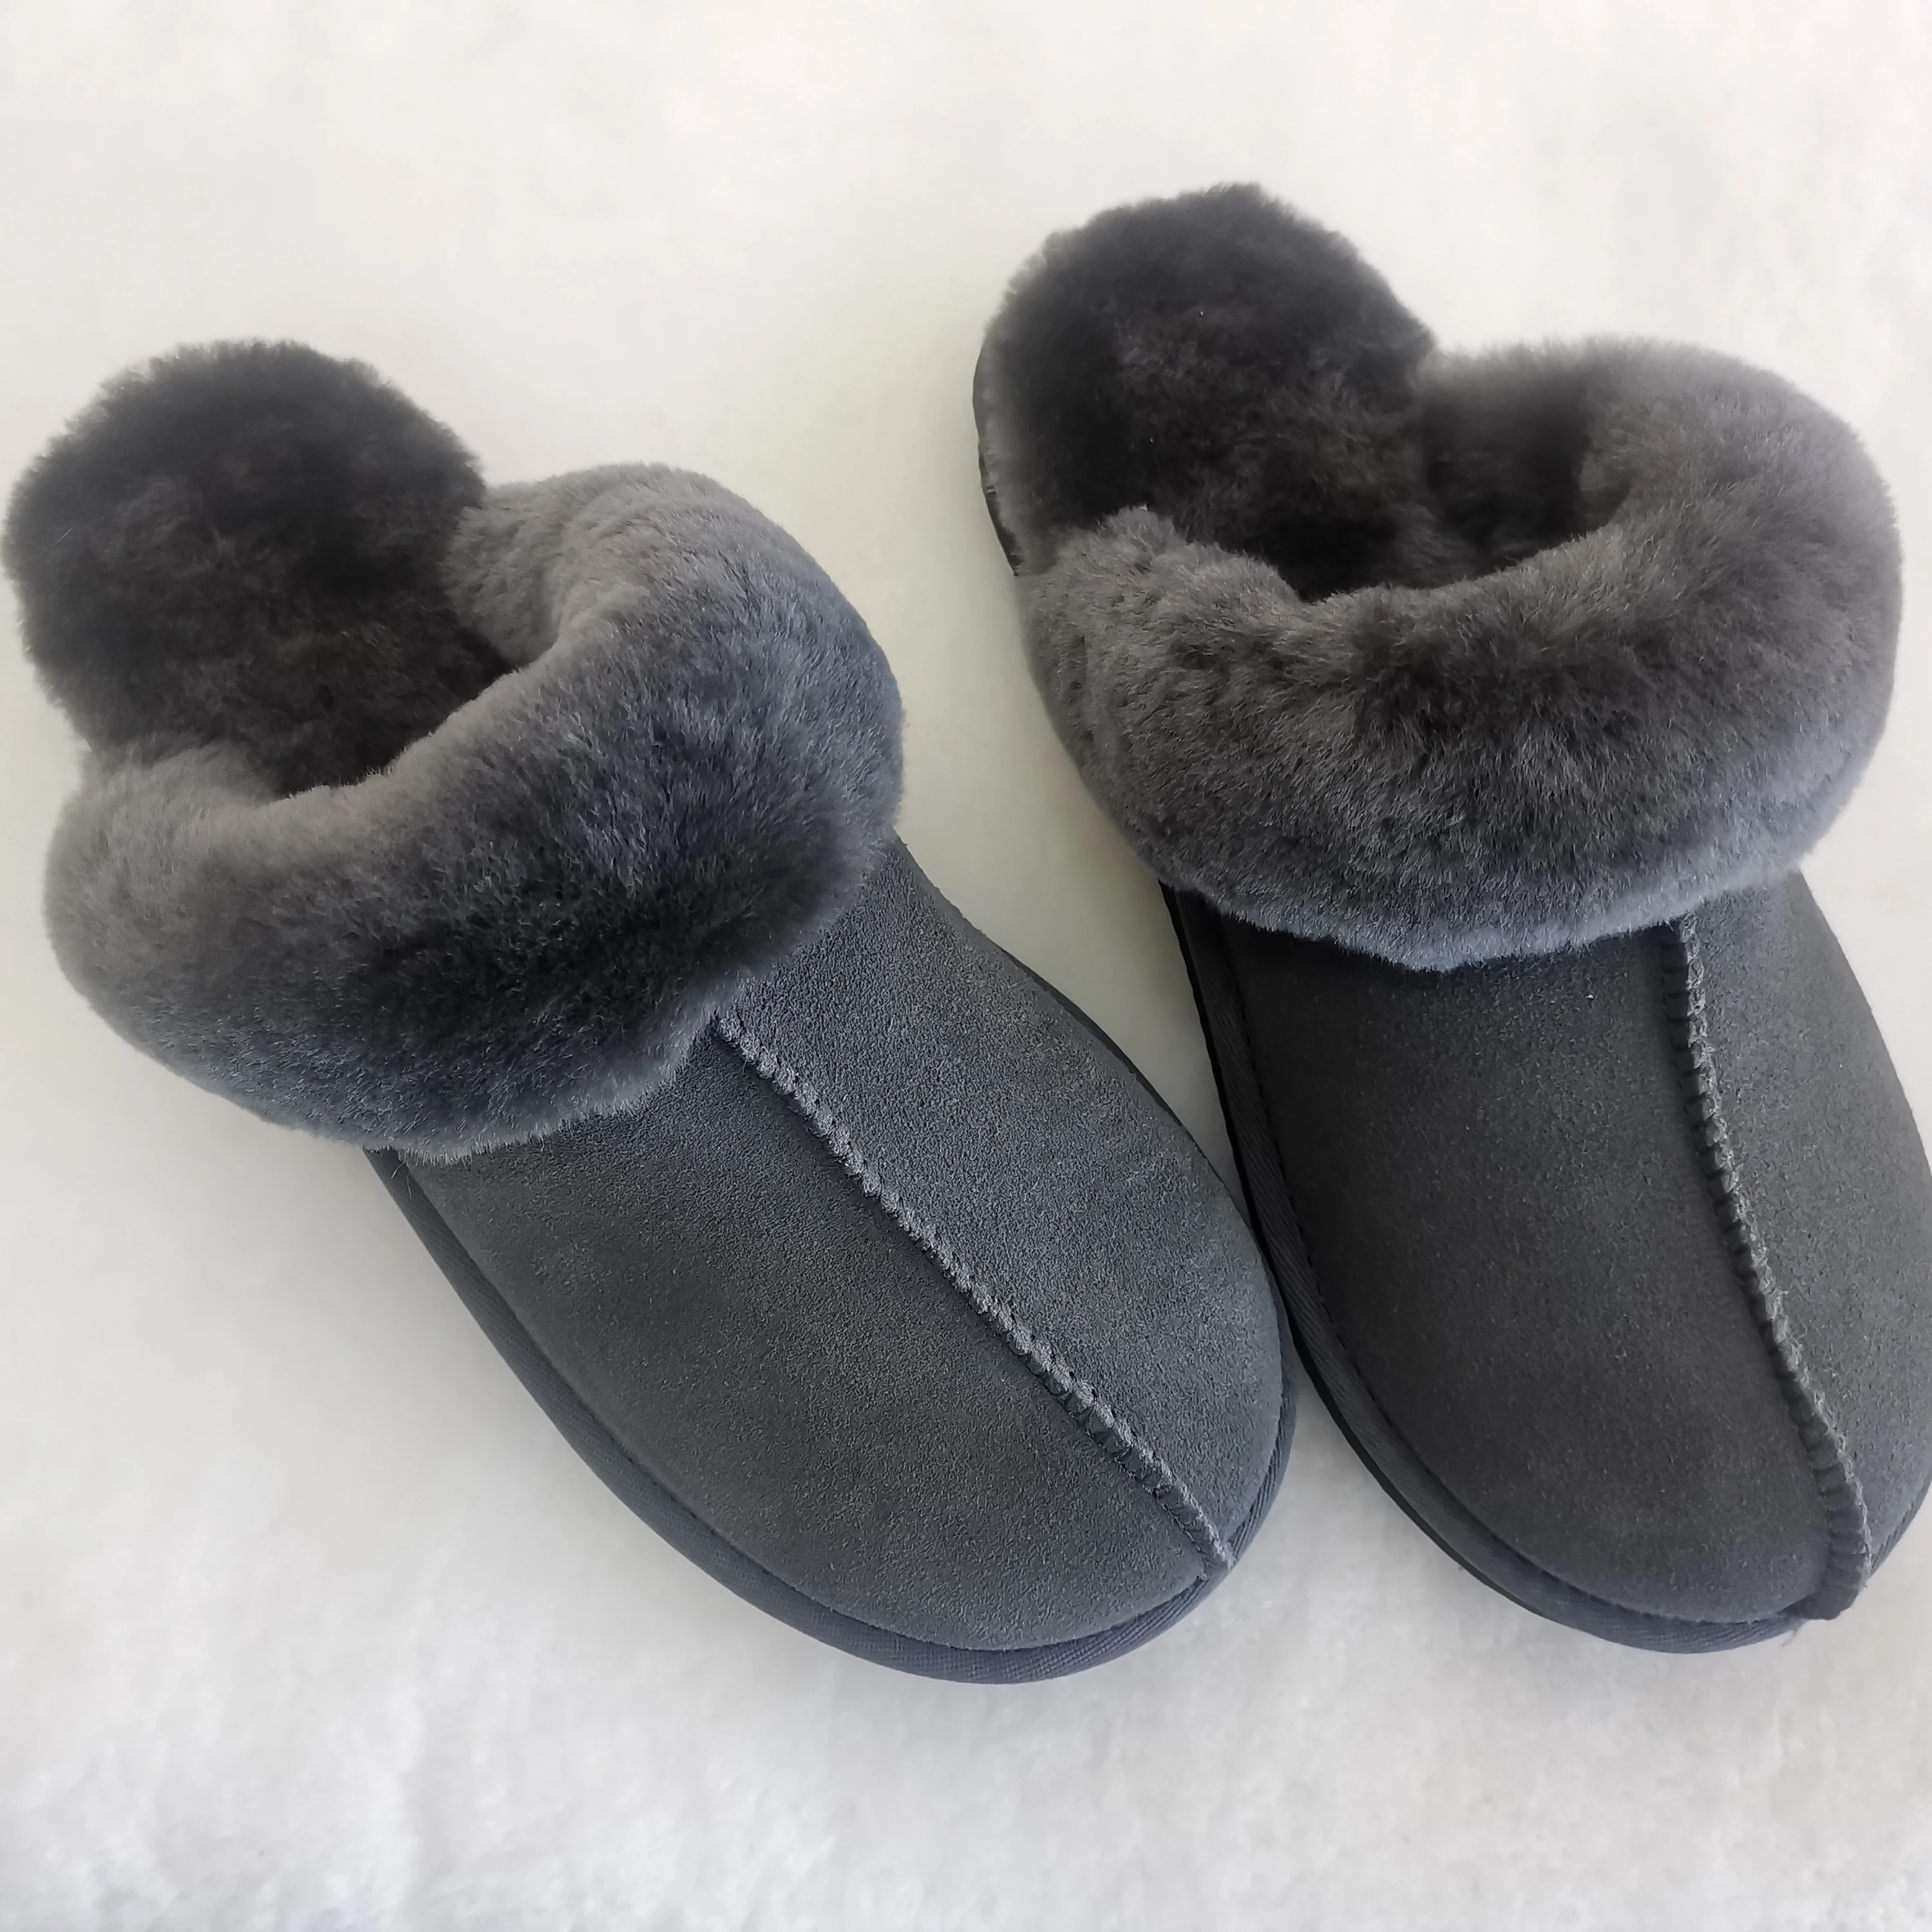 

OEM Cheap Women's Fashion Indoor Home Fluffy Fuzzy Sheep Skin Slippers Real Wool Fur Cross Sheepskin soft slippers, White, blue, pink, grey